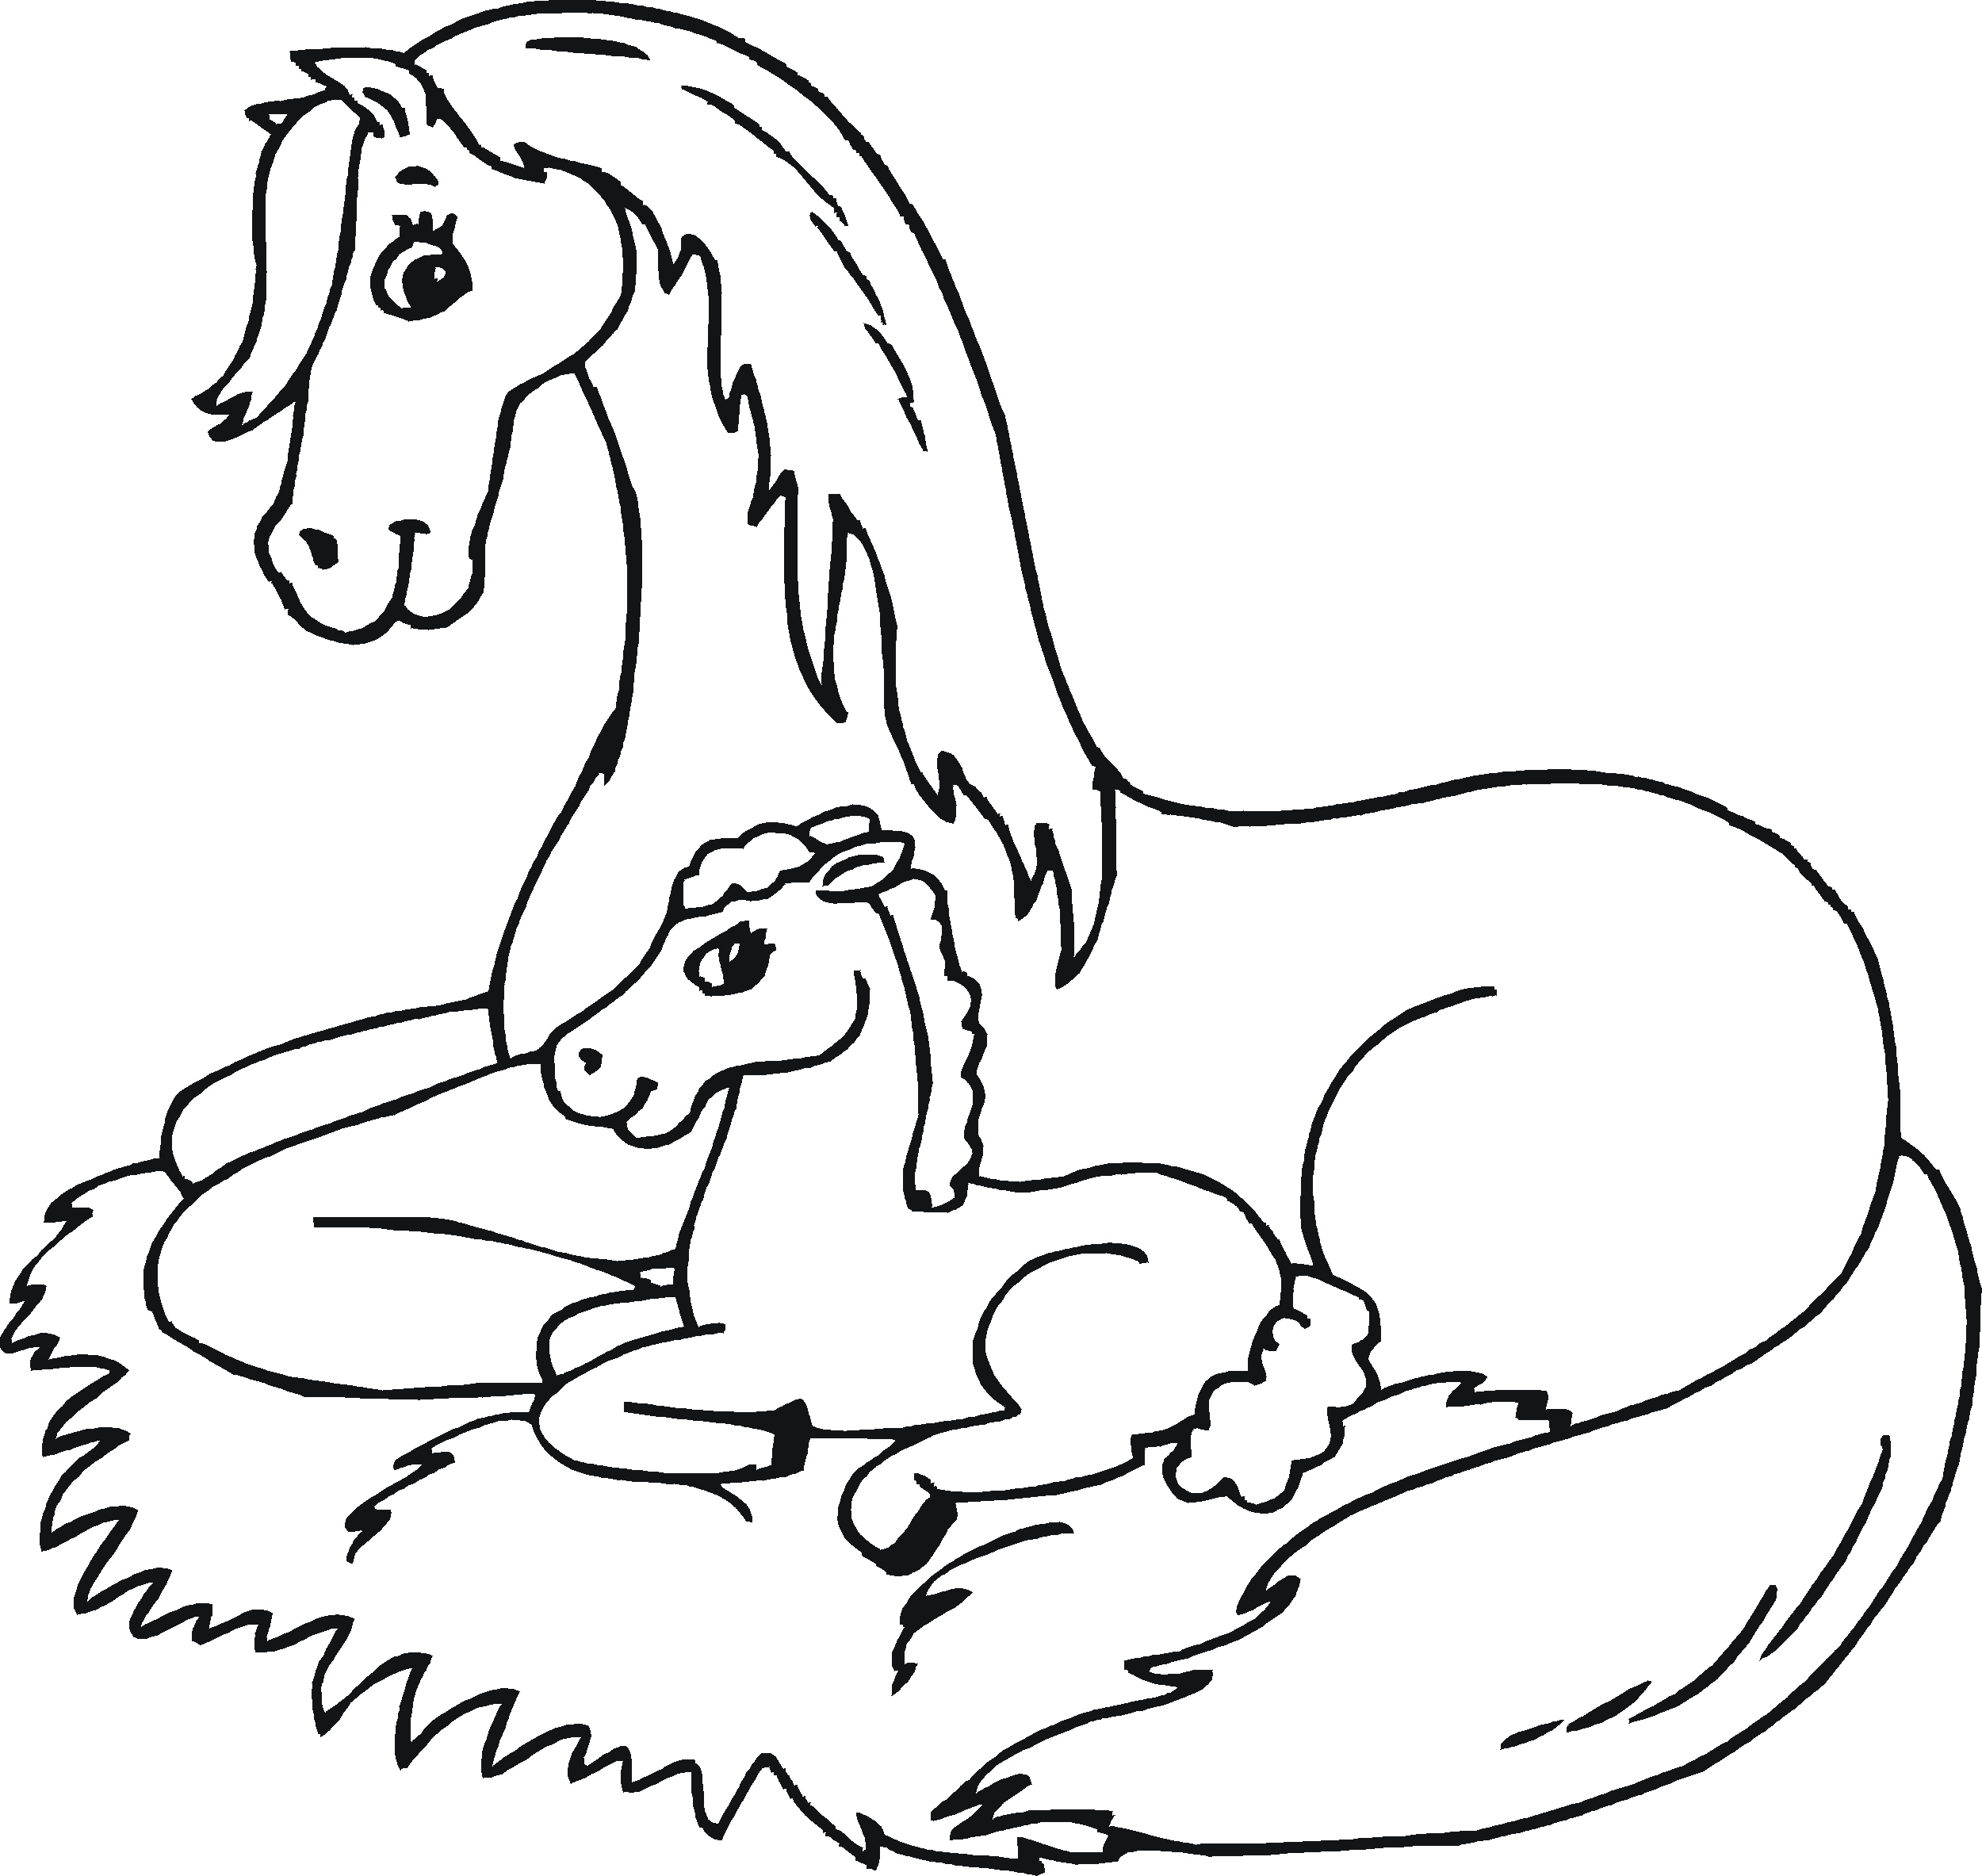 Coloring Book : Baby Horseloring Pages Cute Page Free For ...